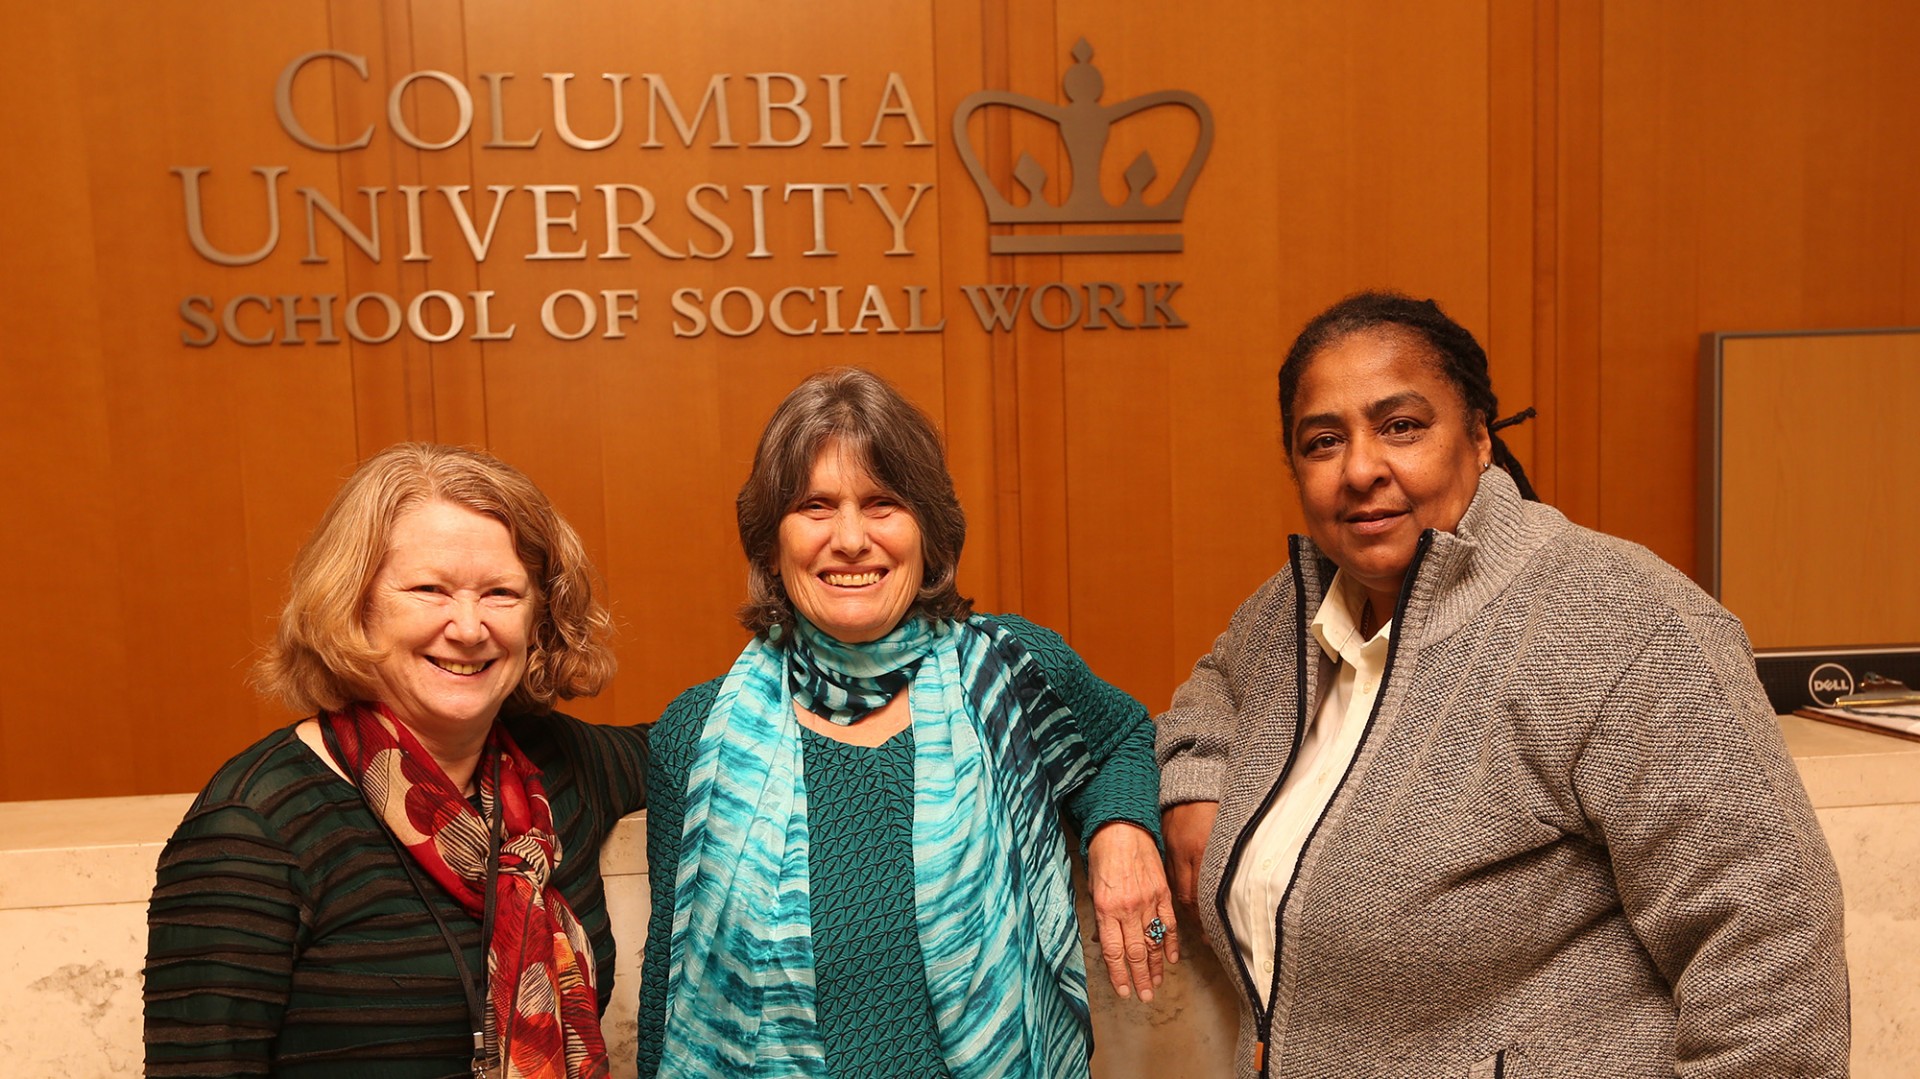 Geraldine Downey, Kathy Boudin, and Cheryl Wilkins stand in front of a marble counter with a wooden panel in the background with the words Columbia University School of Social Work on it.